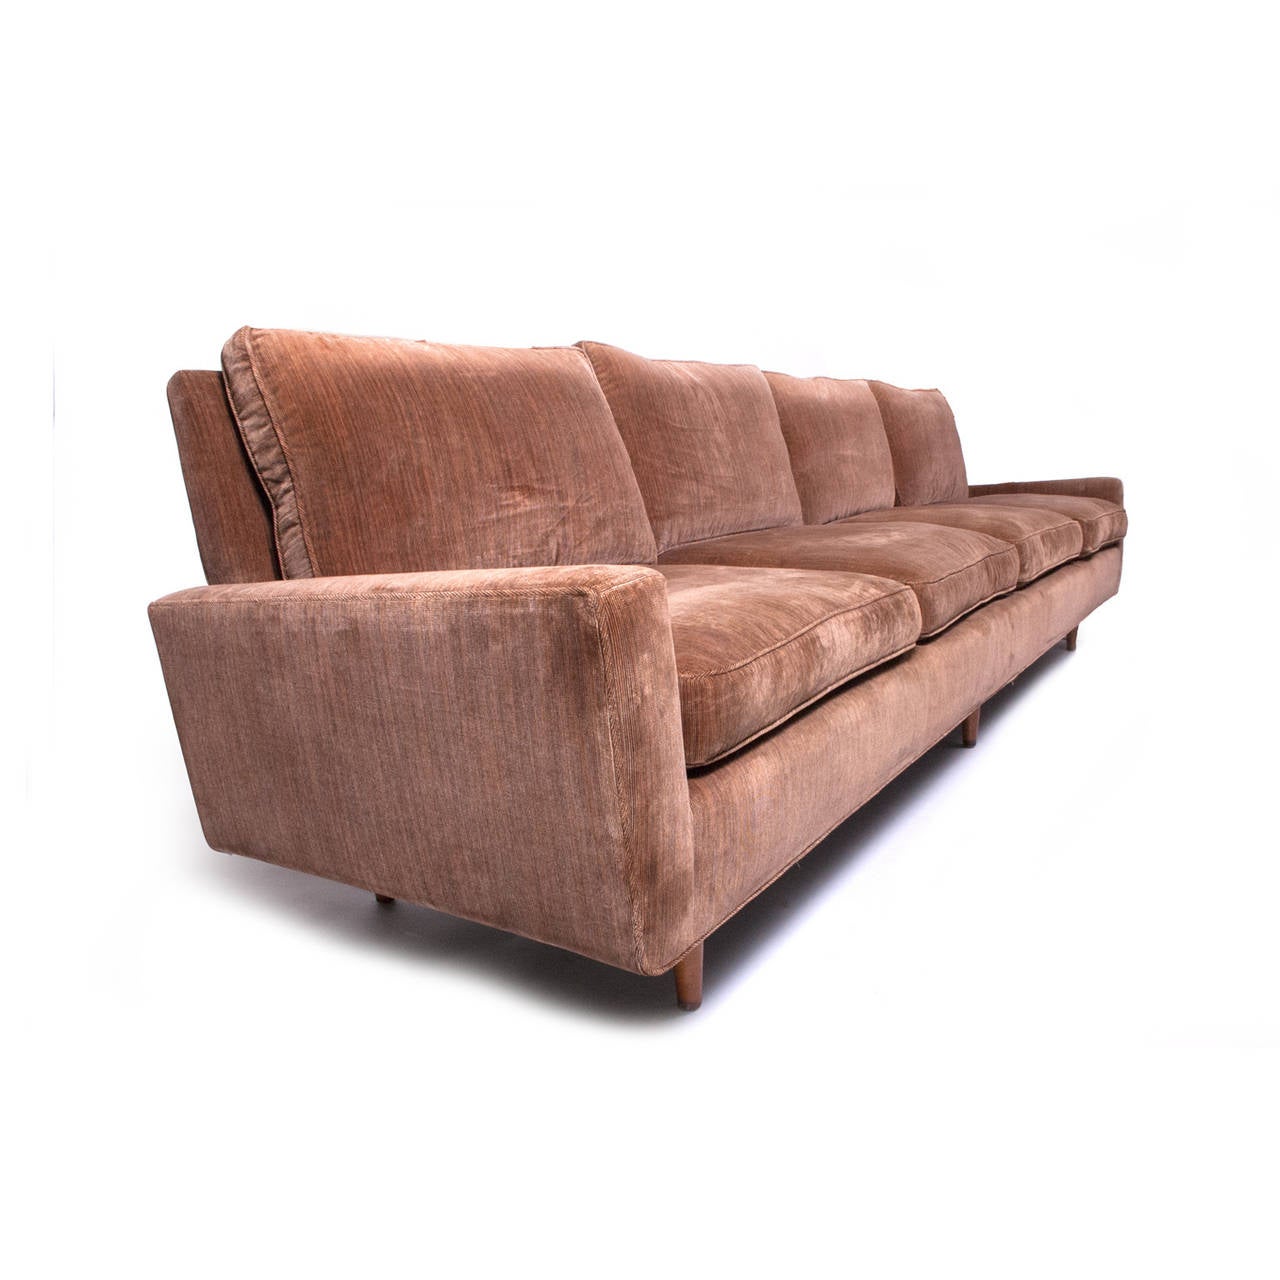 American Rare Sofa No. 26 by Florence Knoll